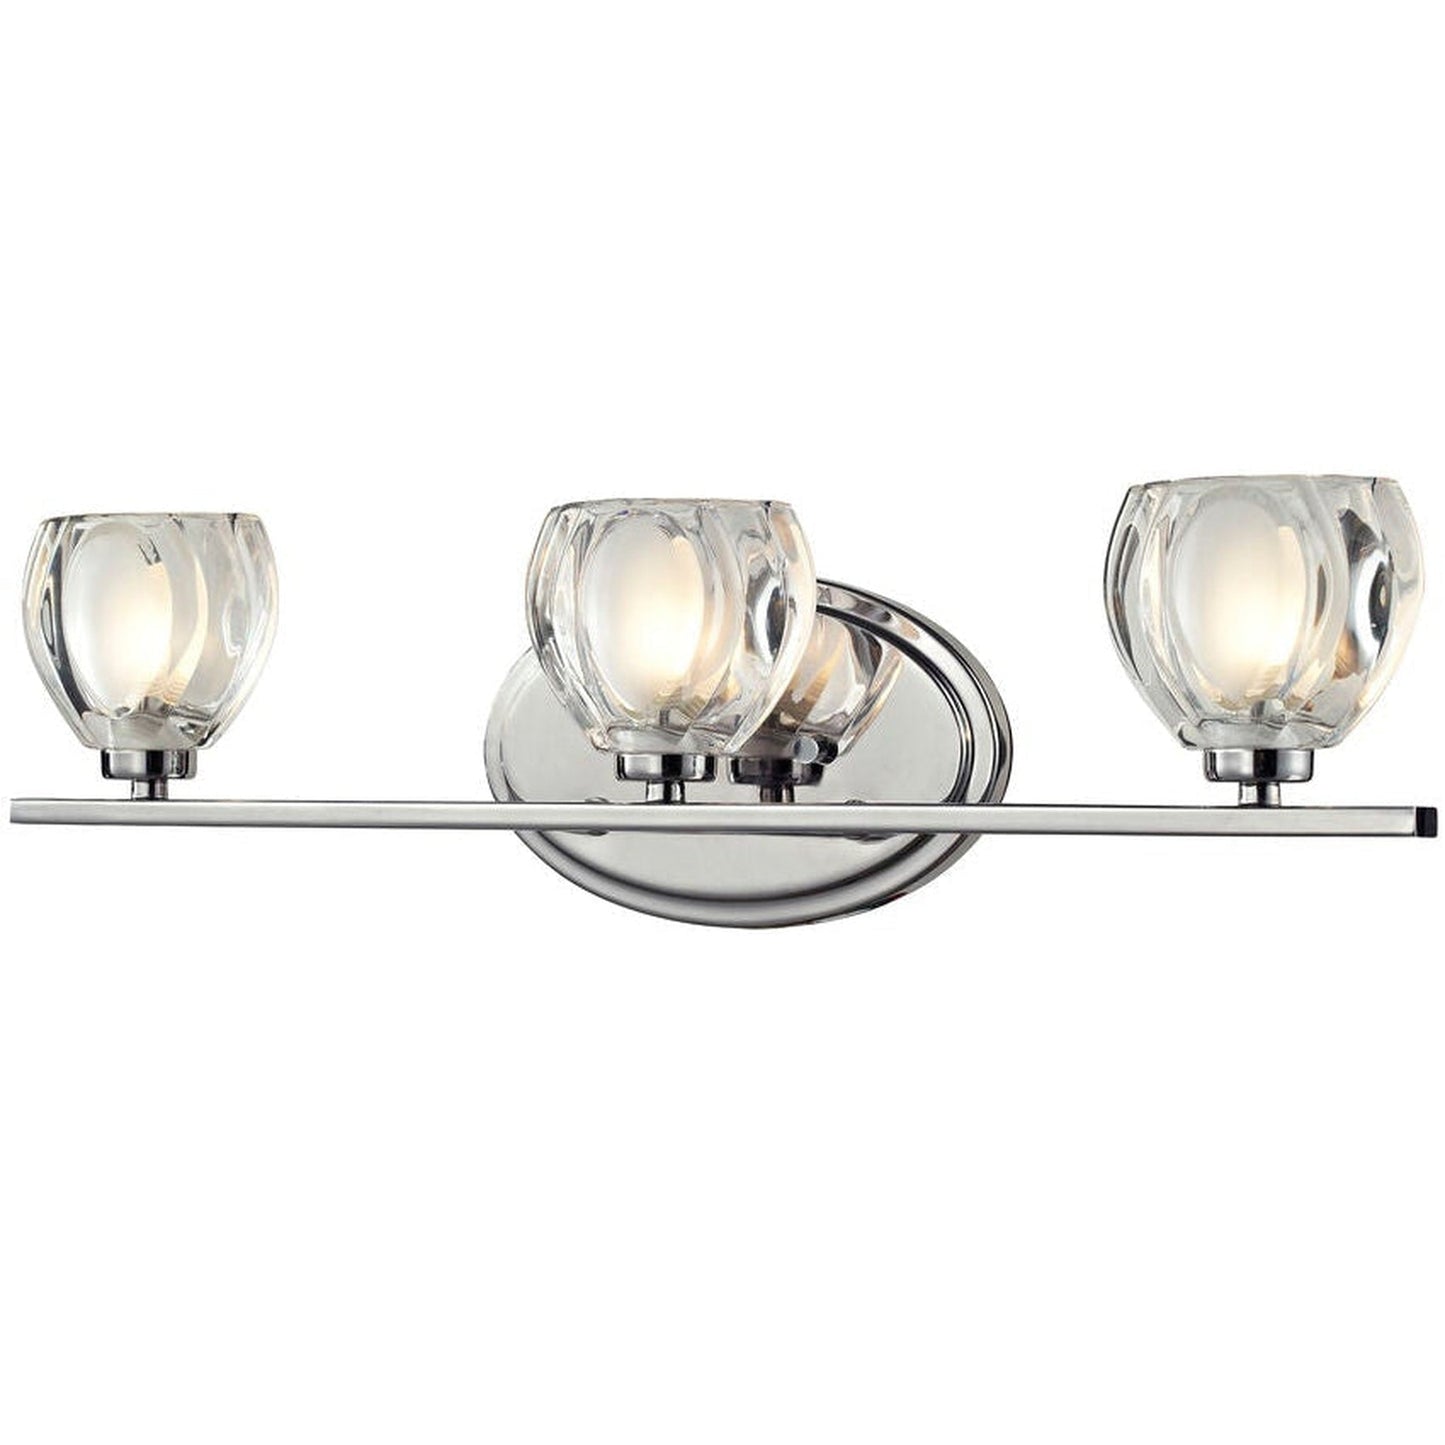 Z-Lite Hale 21" 3-Light Chrome Vanity Light With Clear Frosted Glass Shade